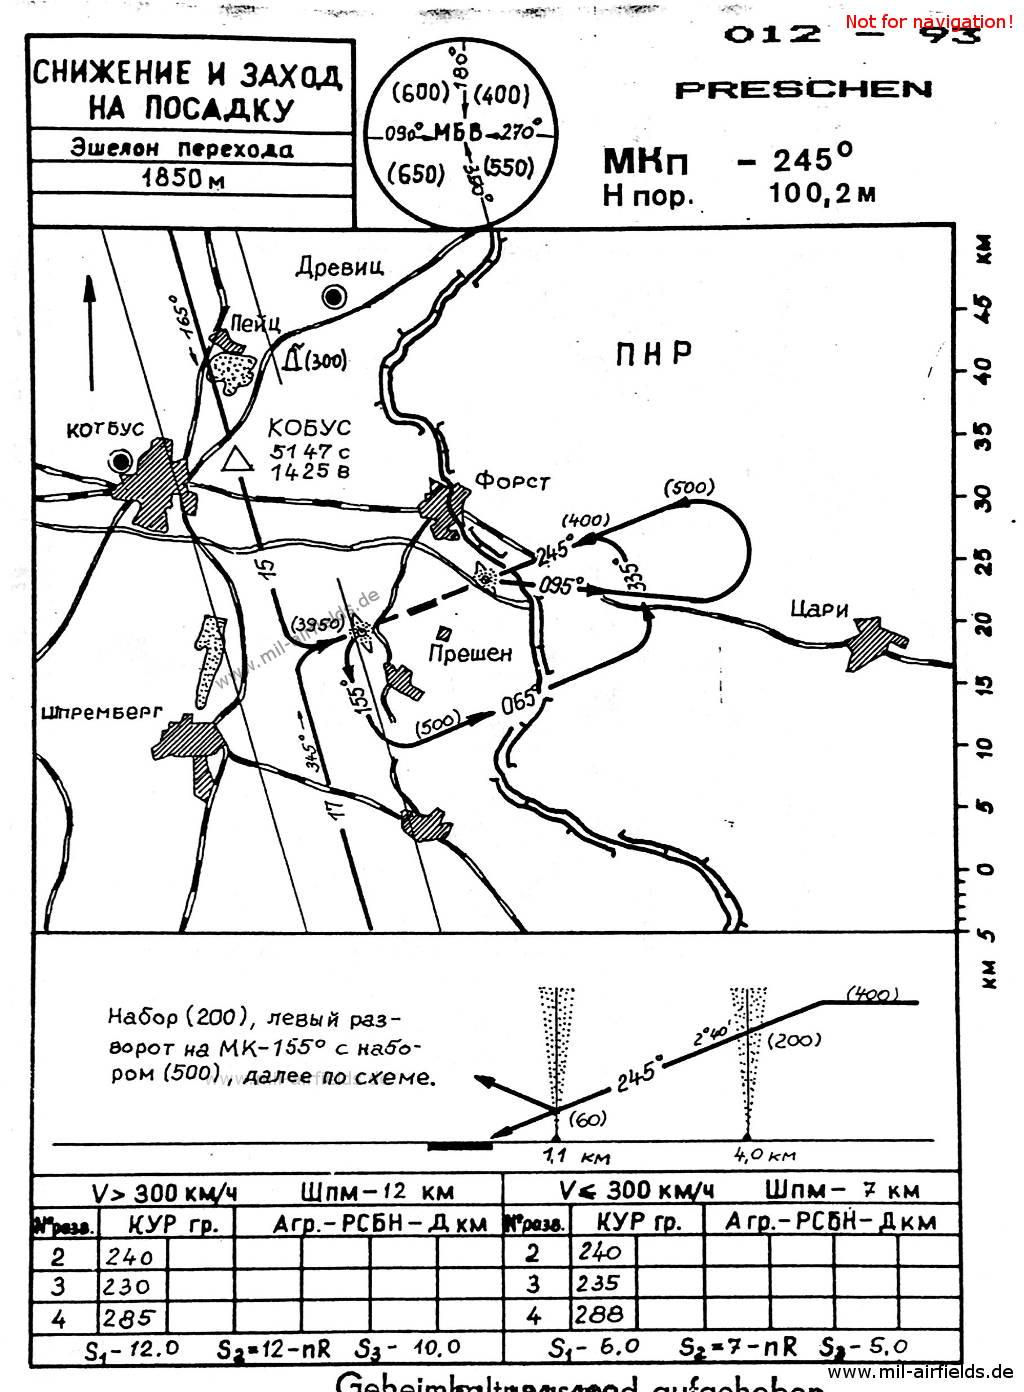 Chart with approach routes to Preschen Air Base in main landing direction